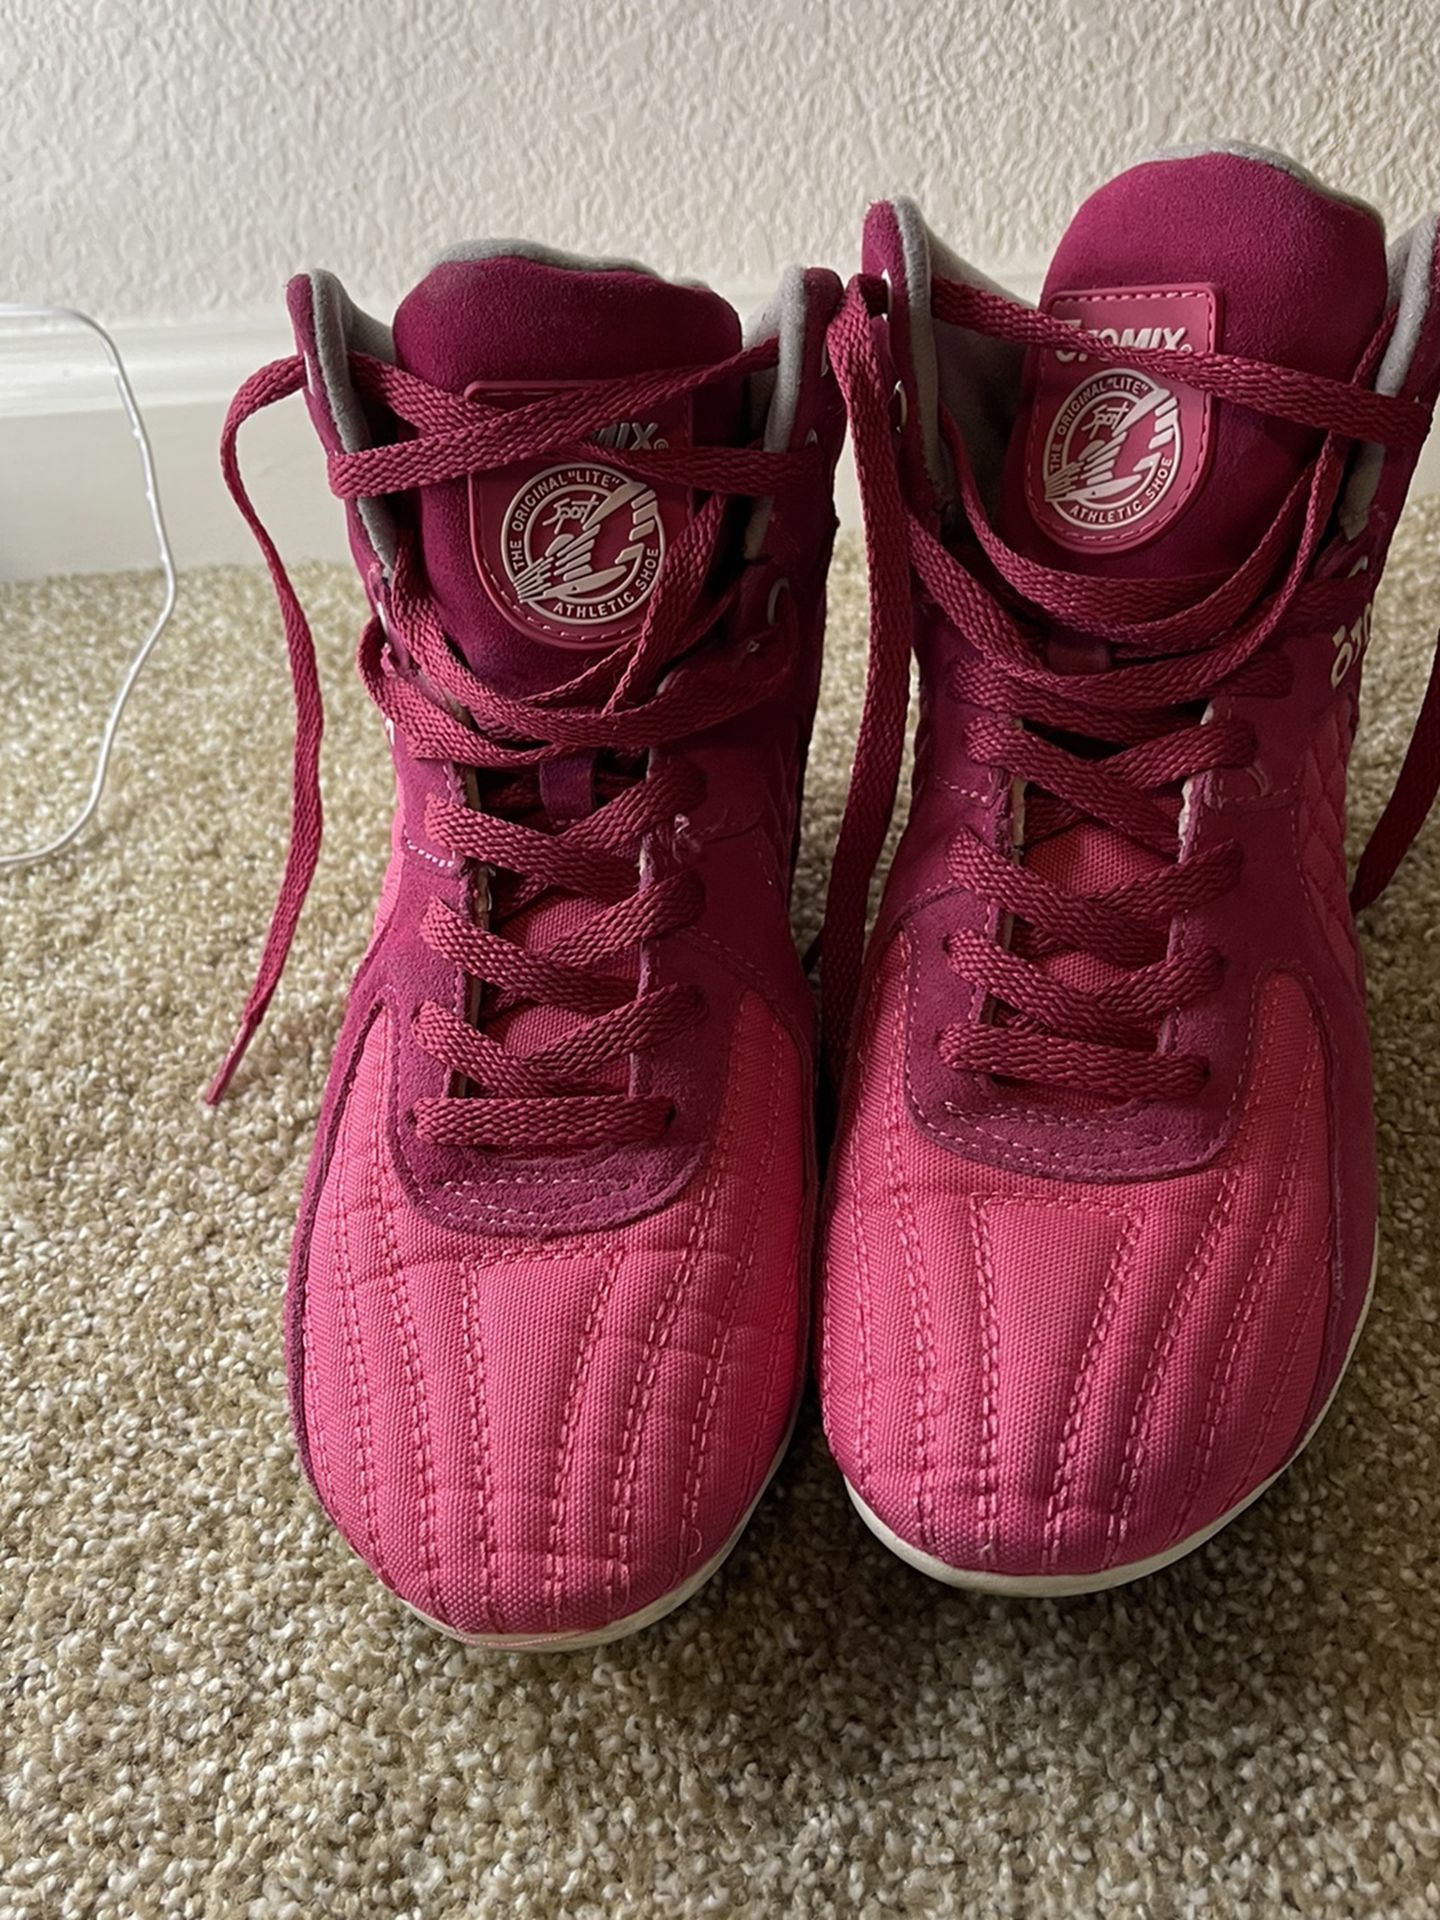 Otomix Woman’s Weight Lifting Shoes